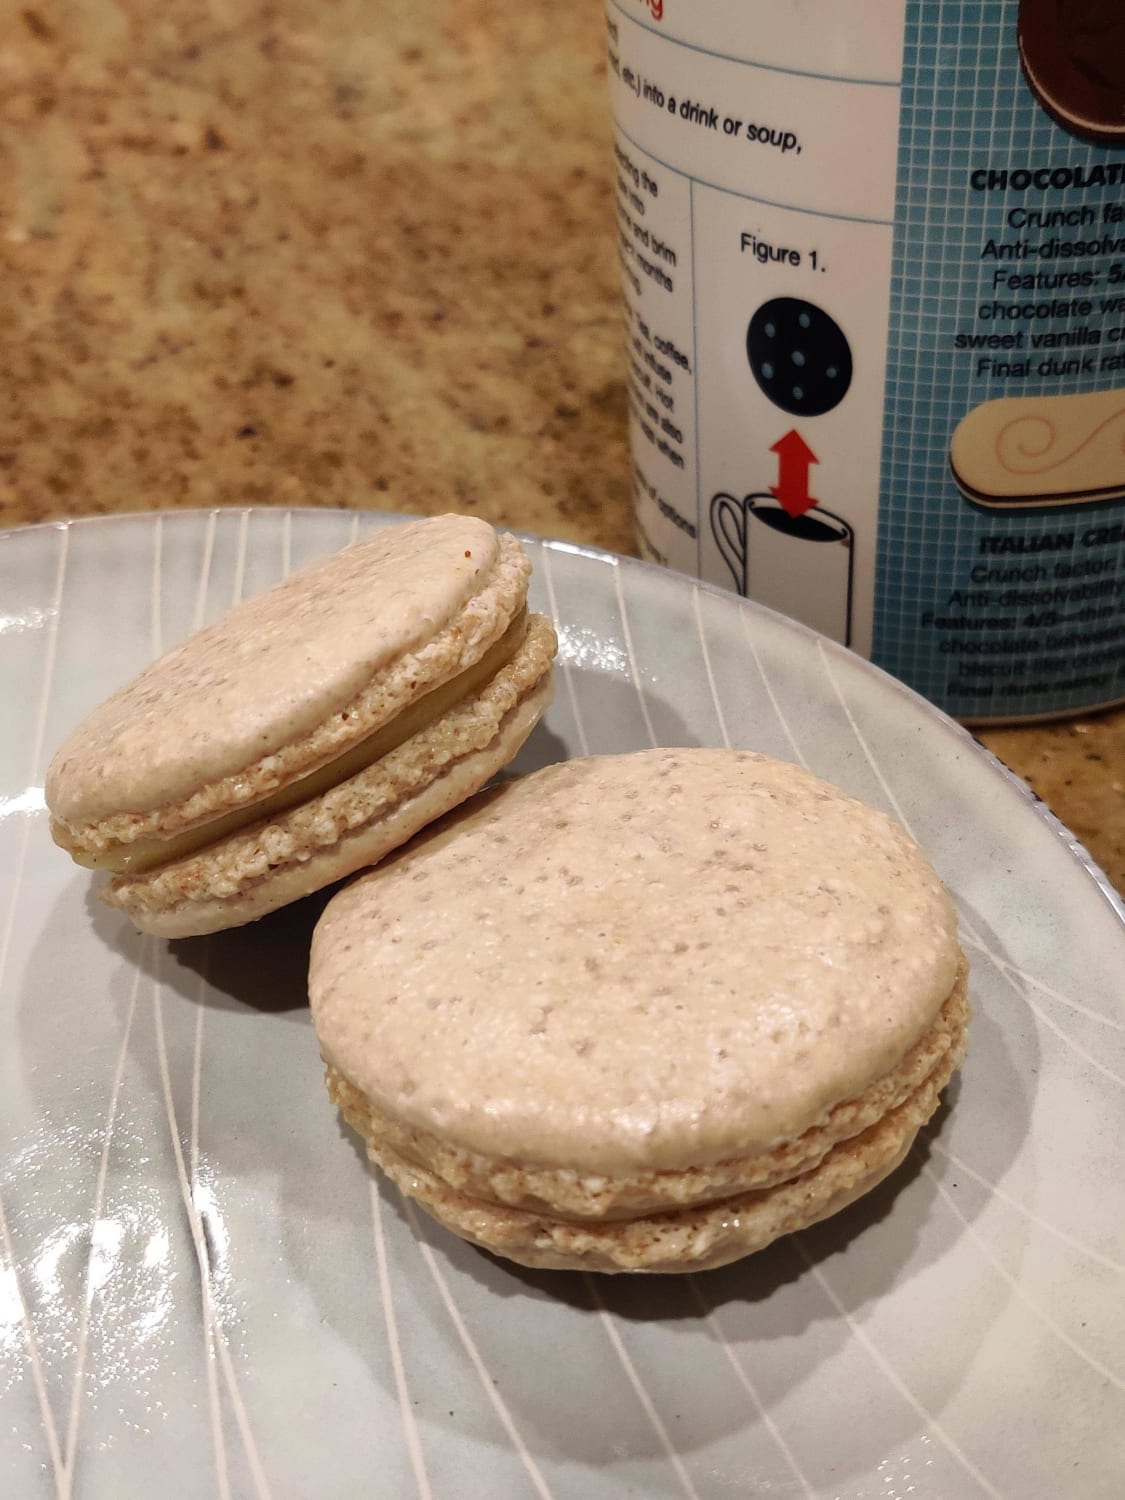 I made nut-free macarons! Toasted Oat Macarons with Vanilla Curd Filling.